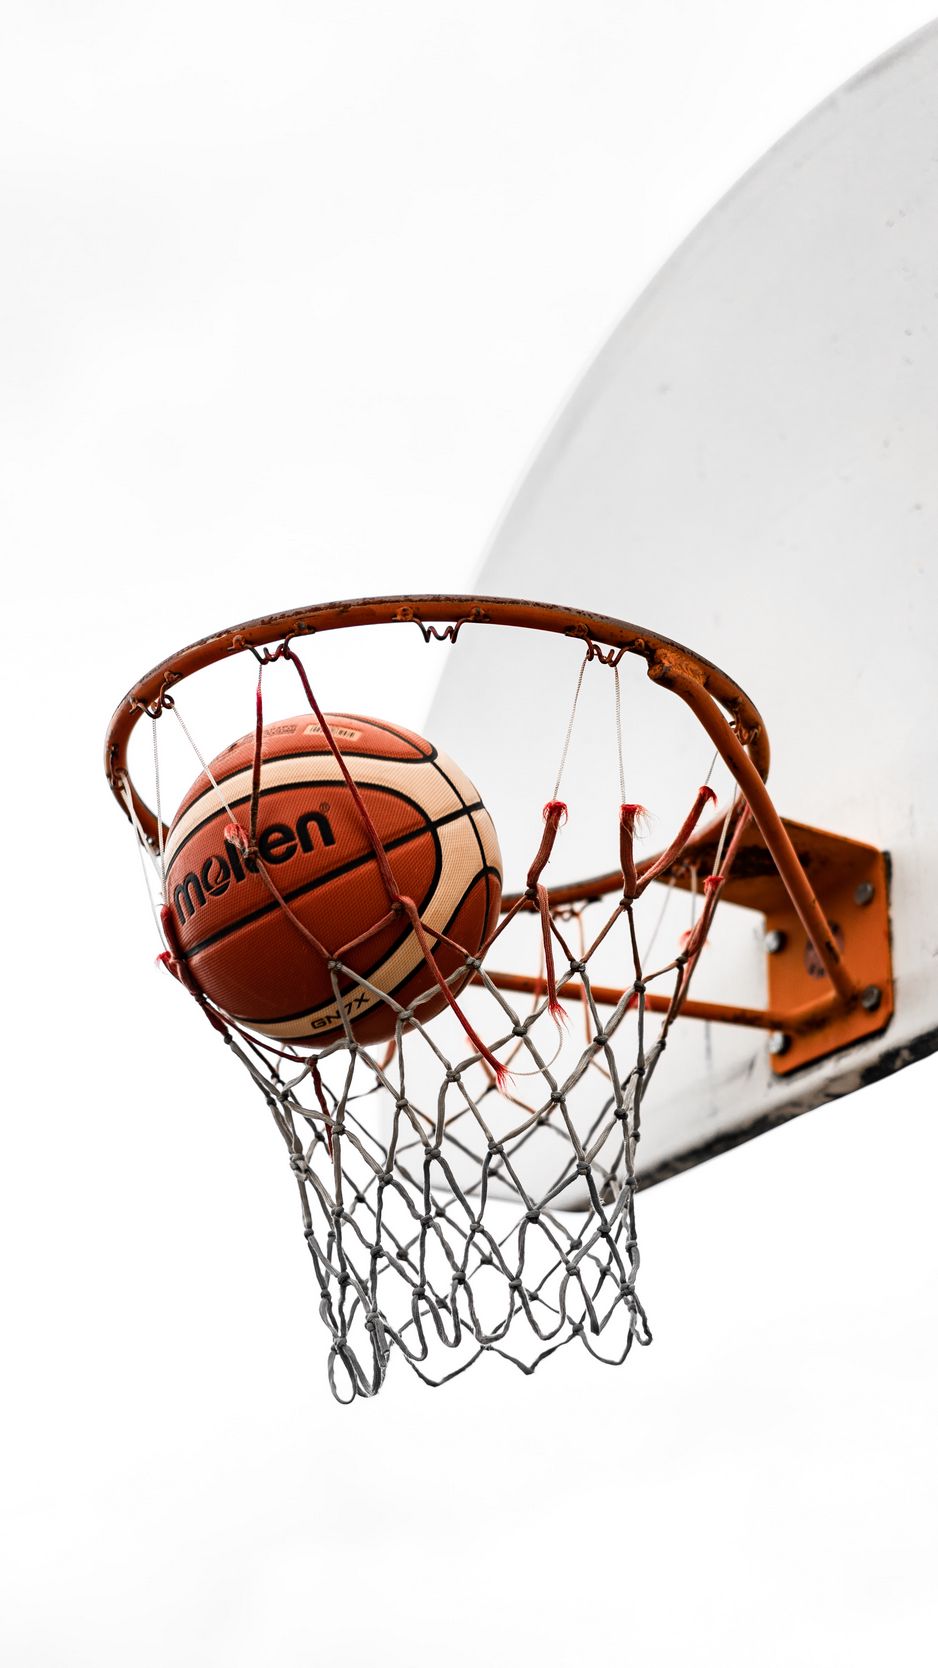 HD wallpaper grayscale photography of Spalding basketball hoop and ball  photograpy  Wallpaper Flare